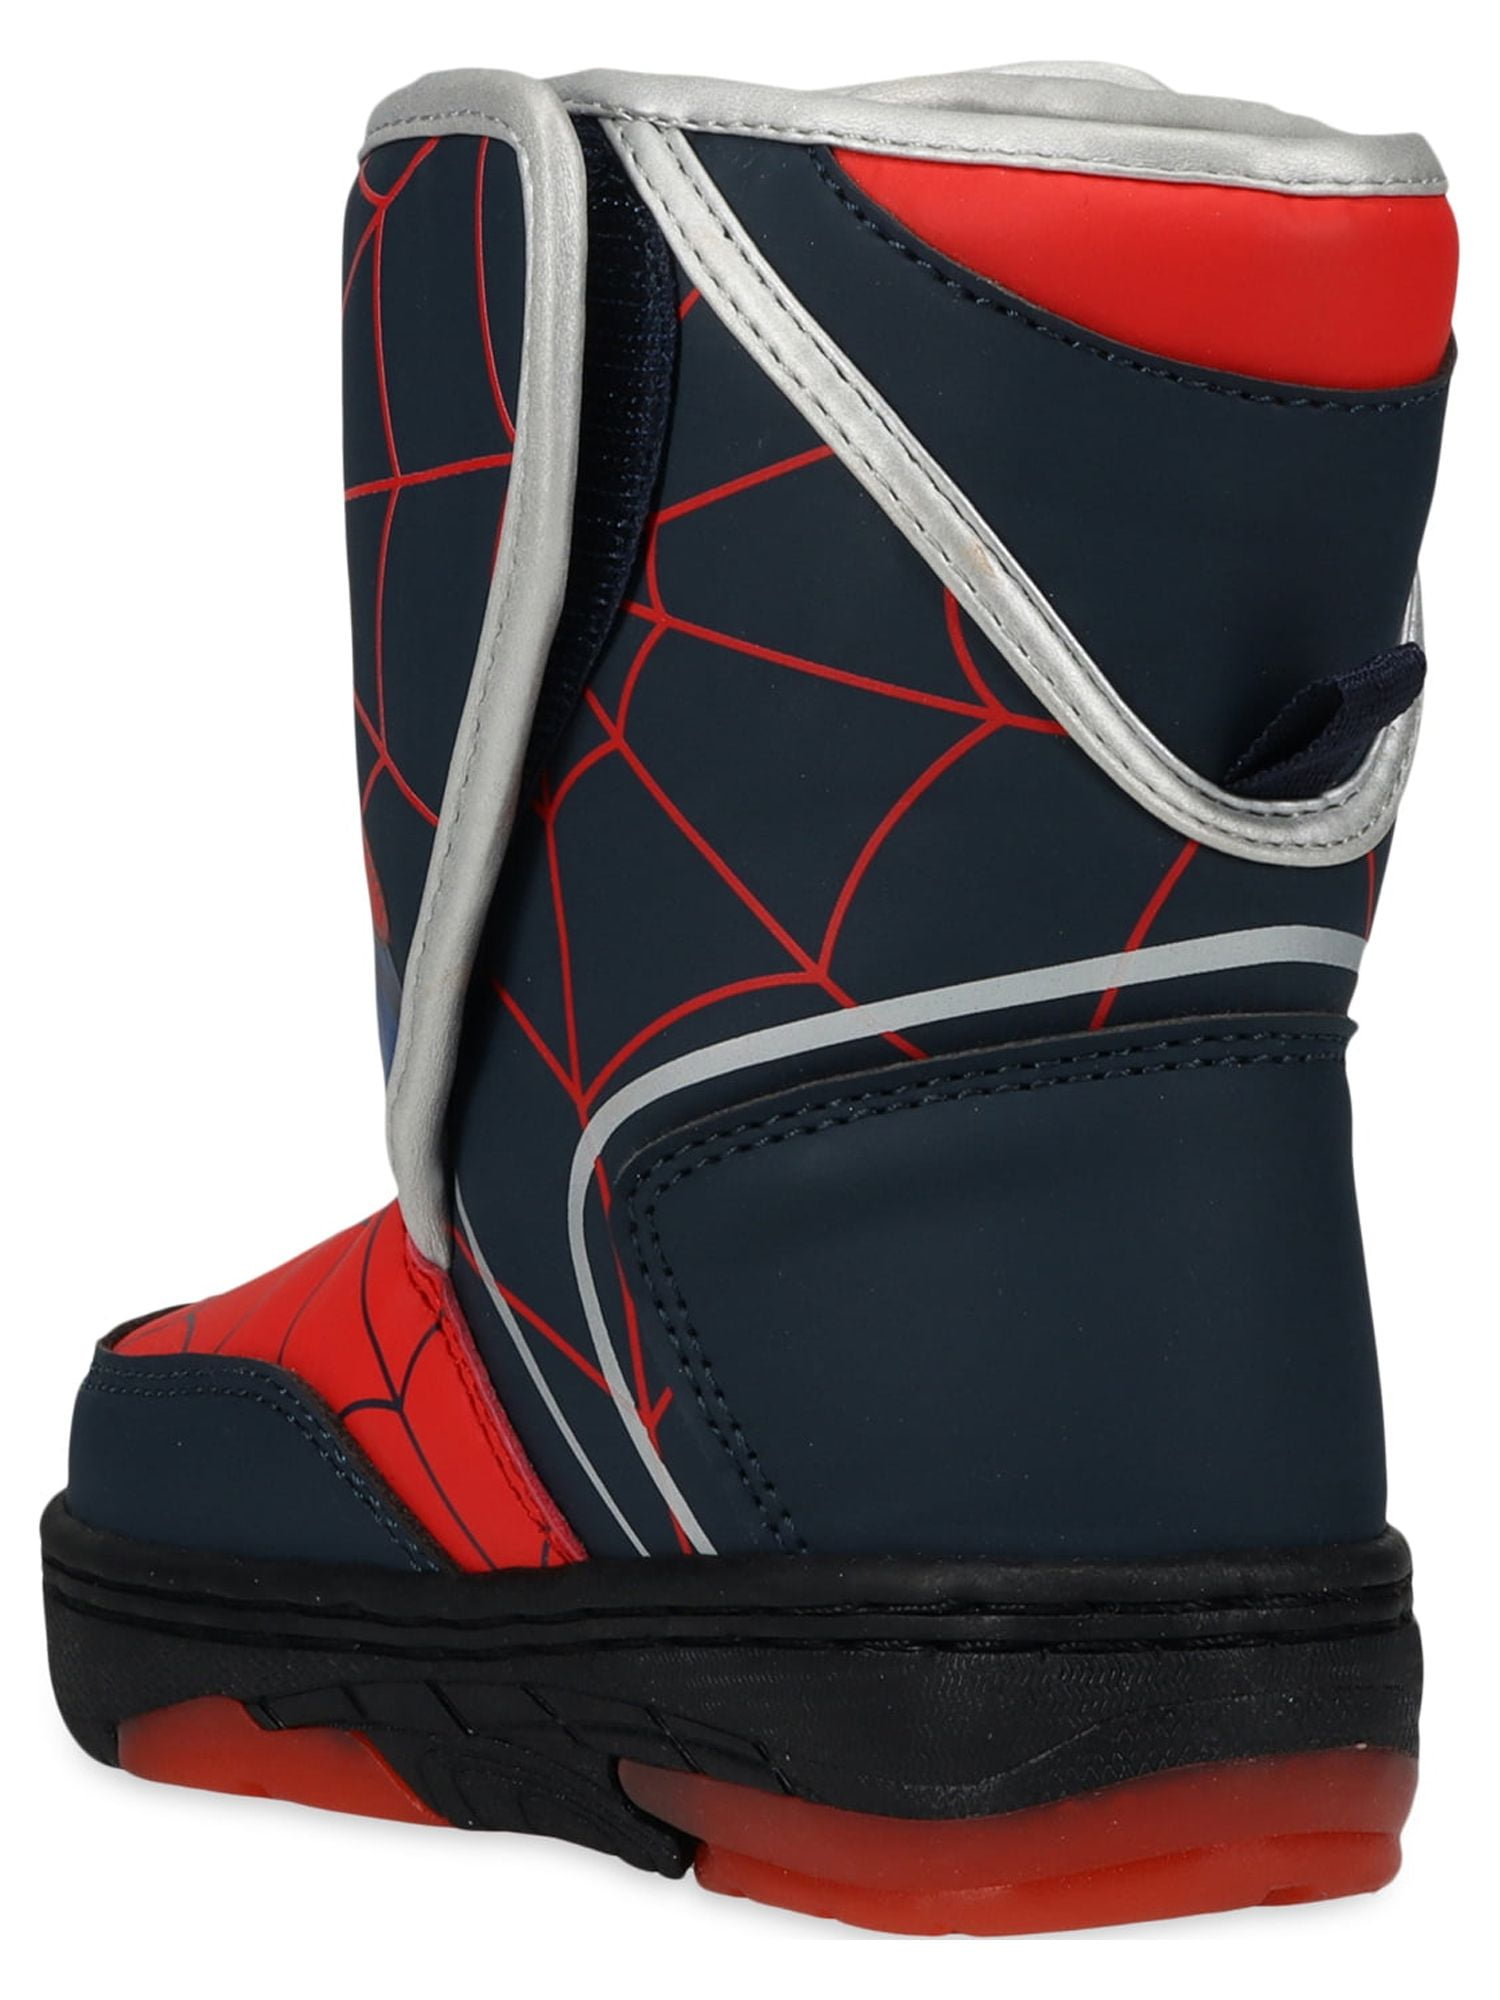 Boys Sizes Up 7-12 Winter Boots, Light Toddler Spiderman Snow